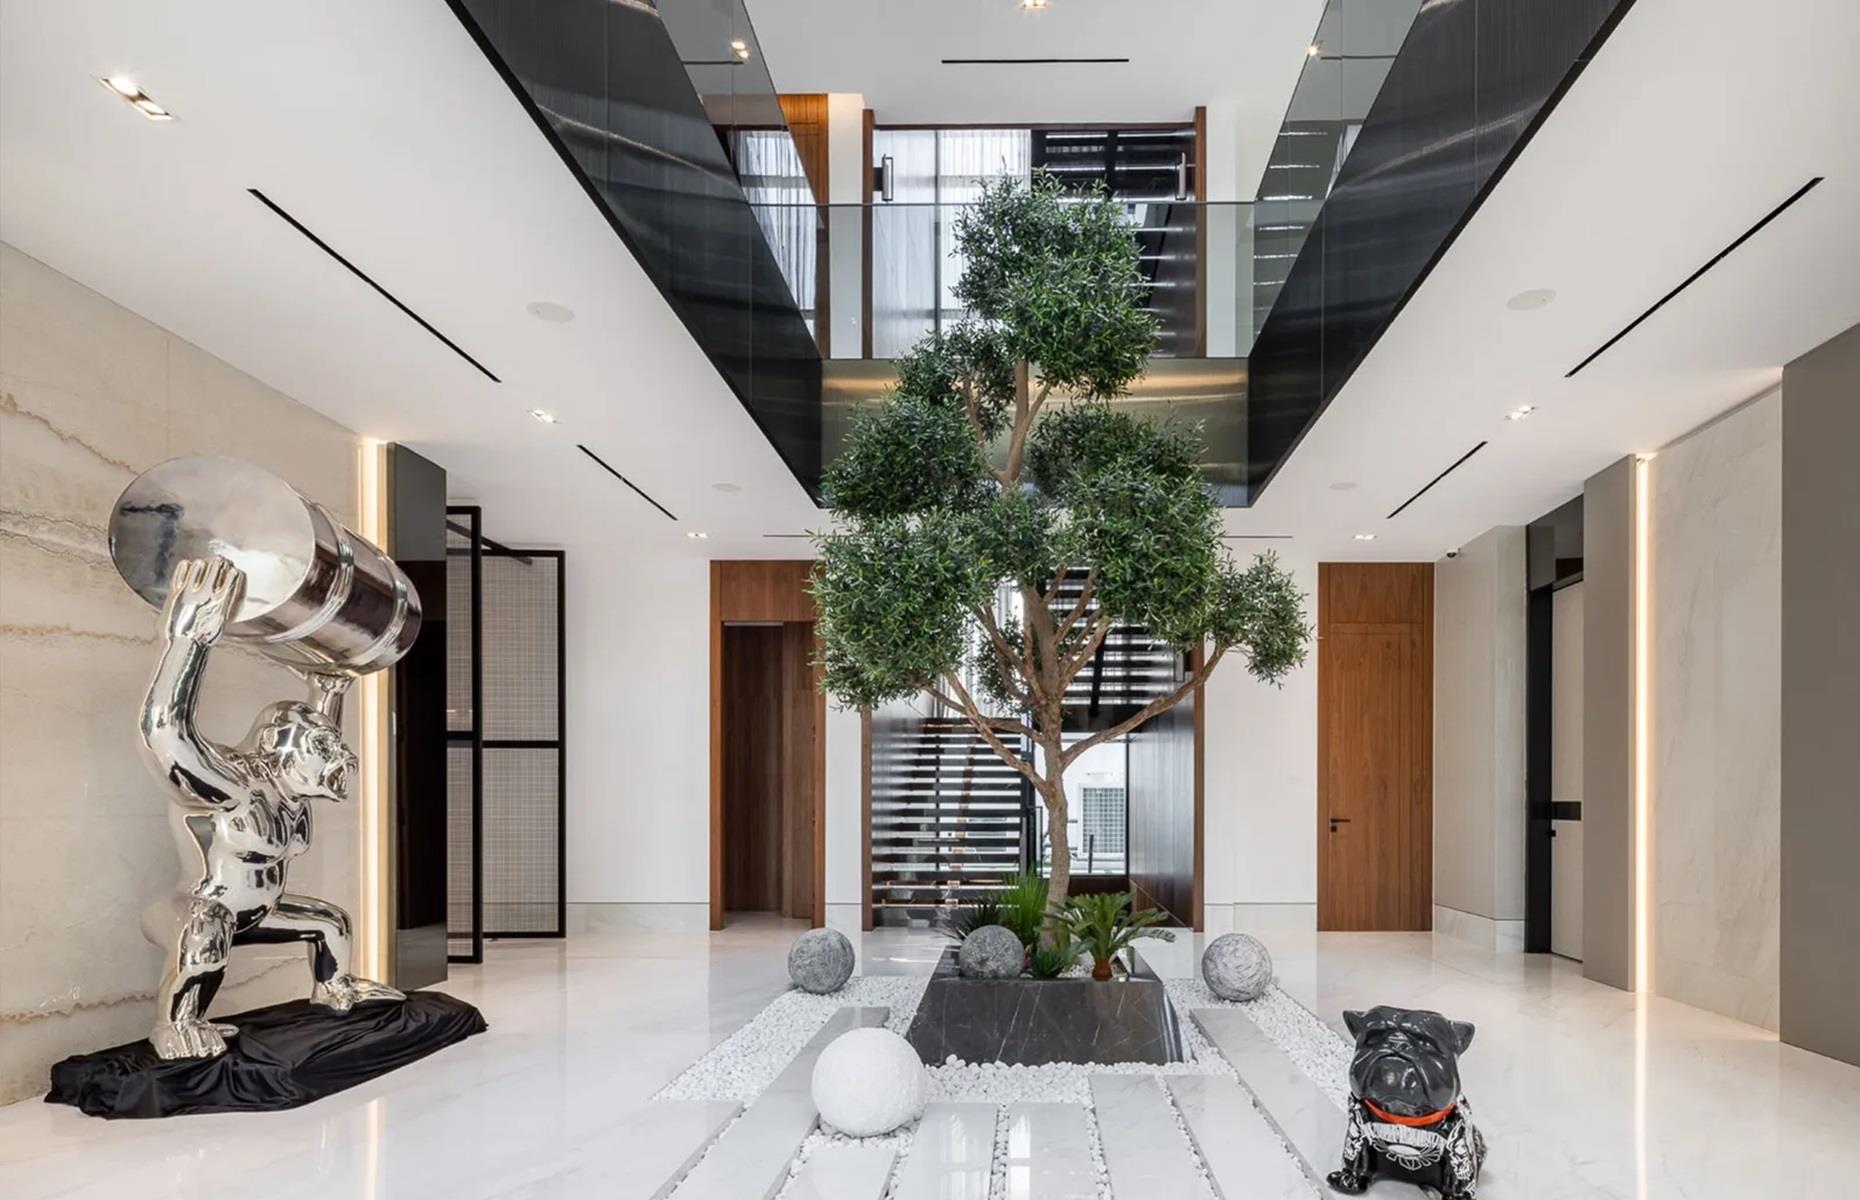 <p>Brand-new, the lucky buyer will be the first owner of the property, which benefits from endless <a href="https://www.loveproperty.com/gallerylist/55904/32-items-for-the-home-only-billionaires-can-afford">amazing extras</a> that only a billionaire could afford. As well as the usual suspects – a family living area, a formal dining room, a bespoke kitchen, six bedrooms and six bathrooms – the pad also features a gorgeous, Japanese-inspired atrium, a cigar room and a prayer room. But that isn’t nearly all…</p>